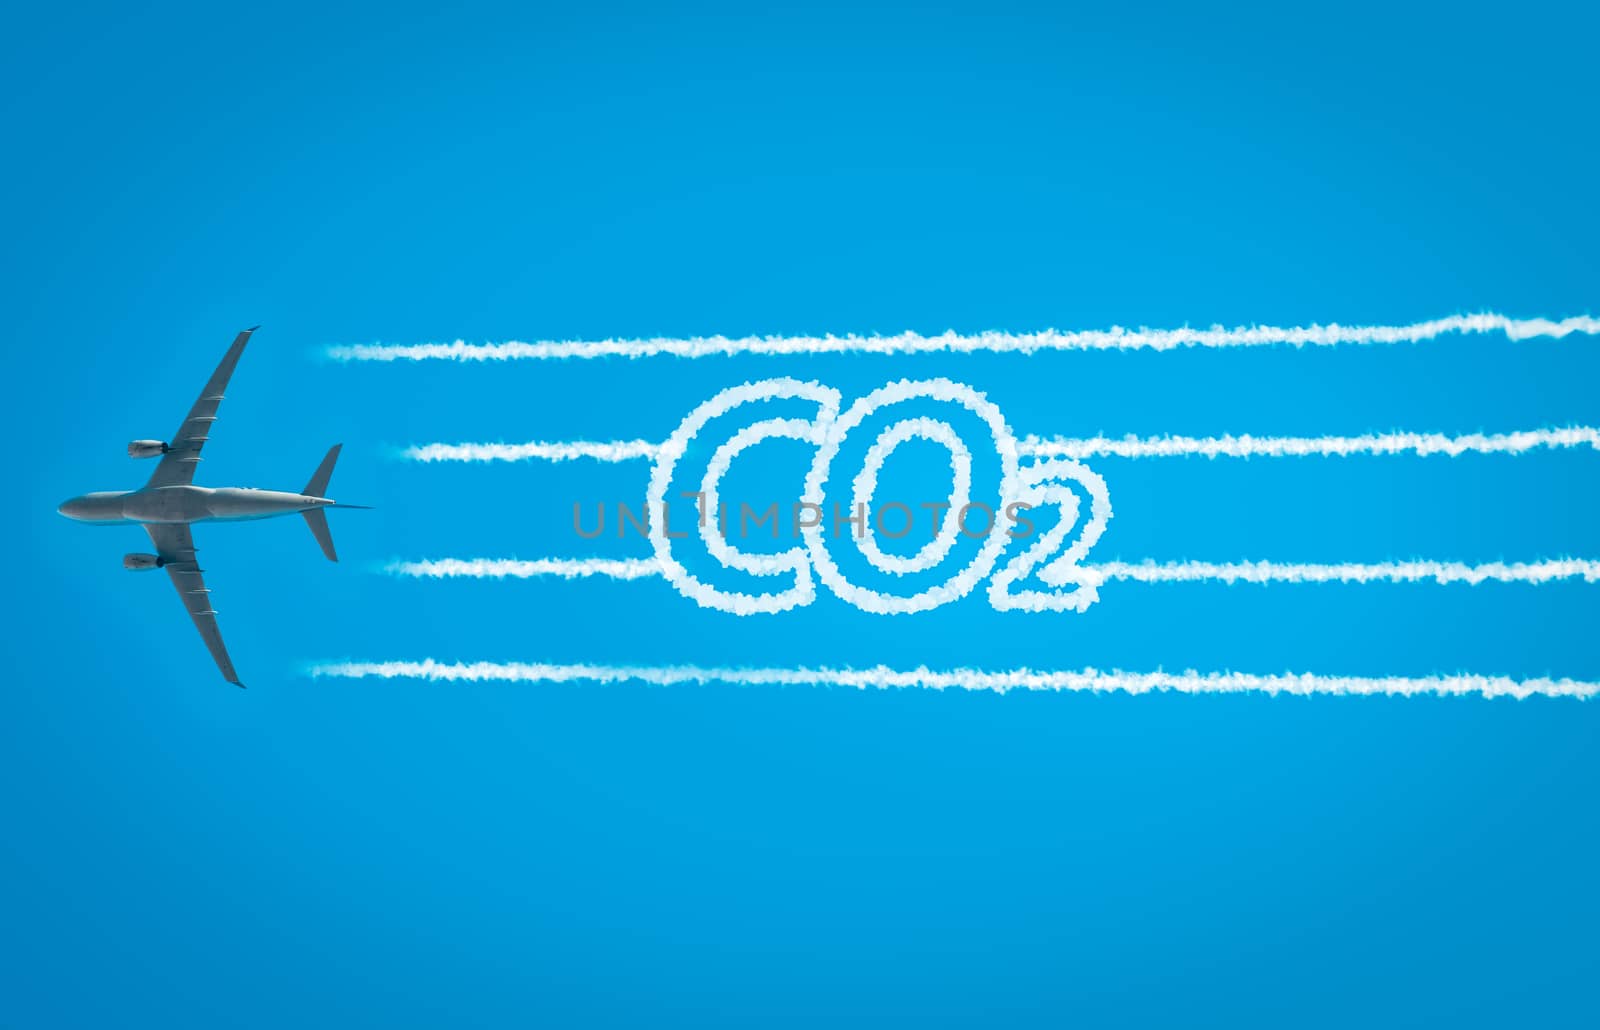 Airplane leaving jet contrails with CO2 word inside. Suitable for ecofriendly and sustainable journey concepts and the negative impact on the environment.